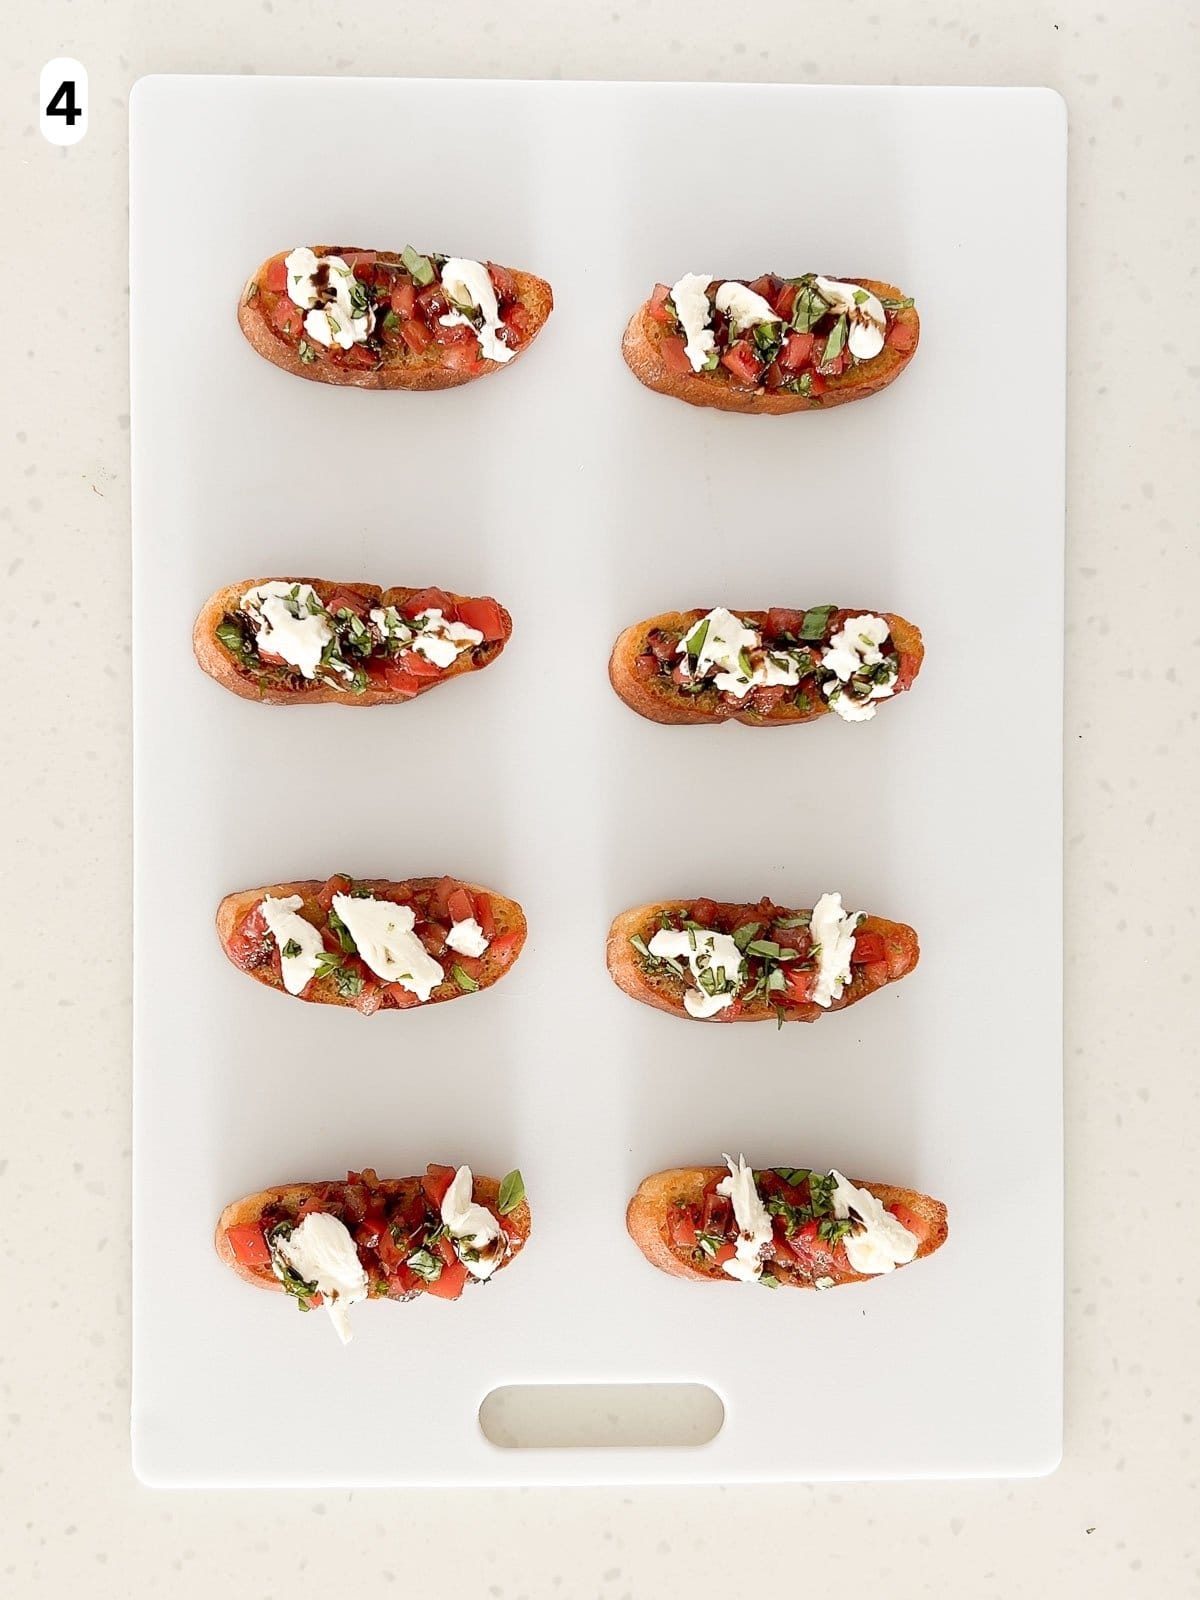 The bruschetta is topped with burrata.